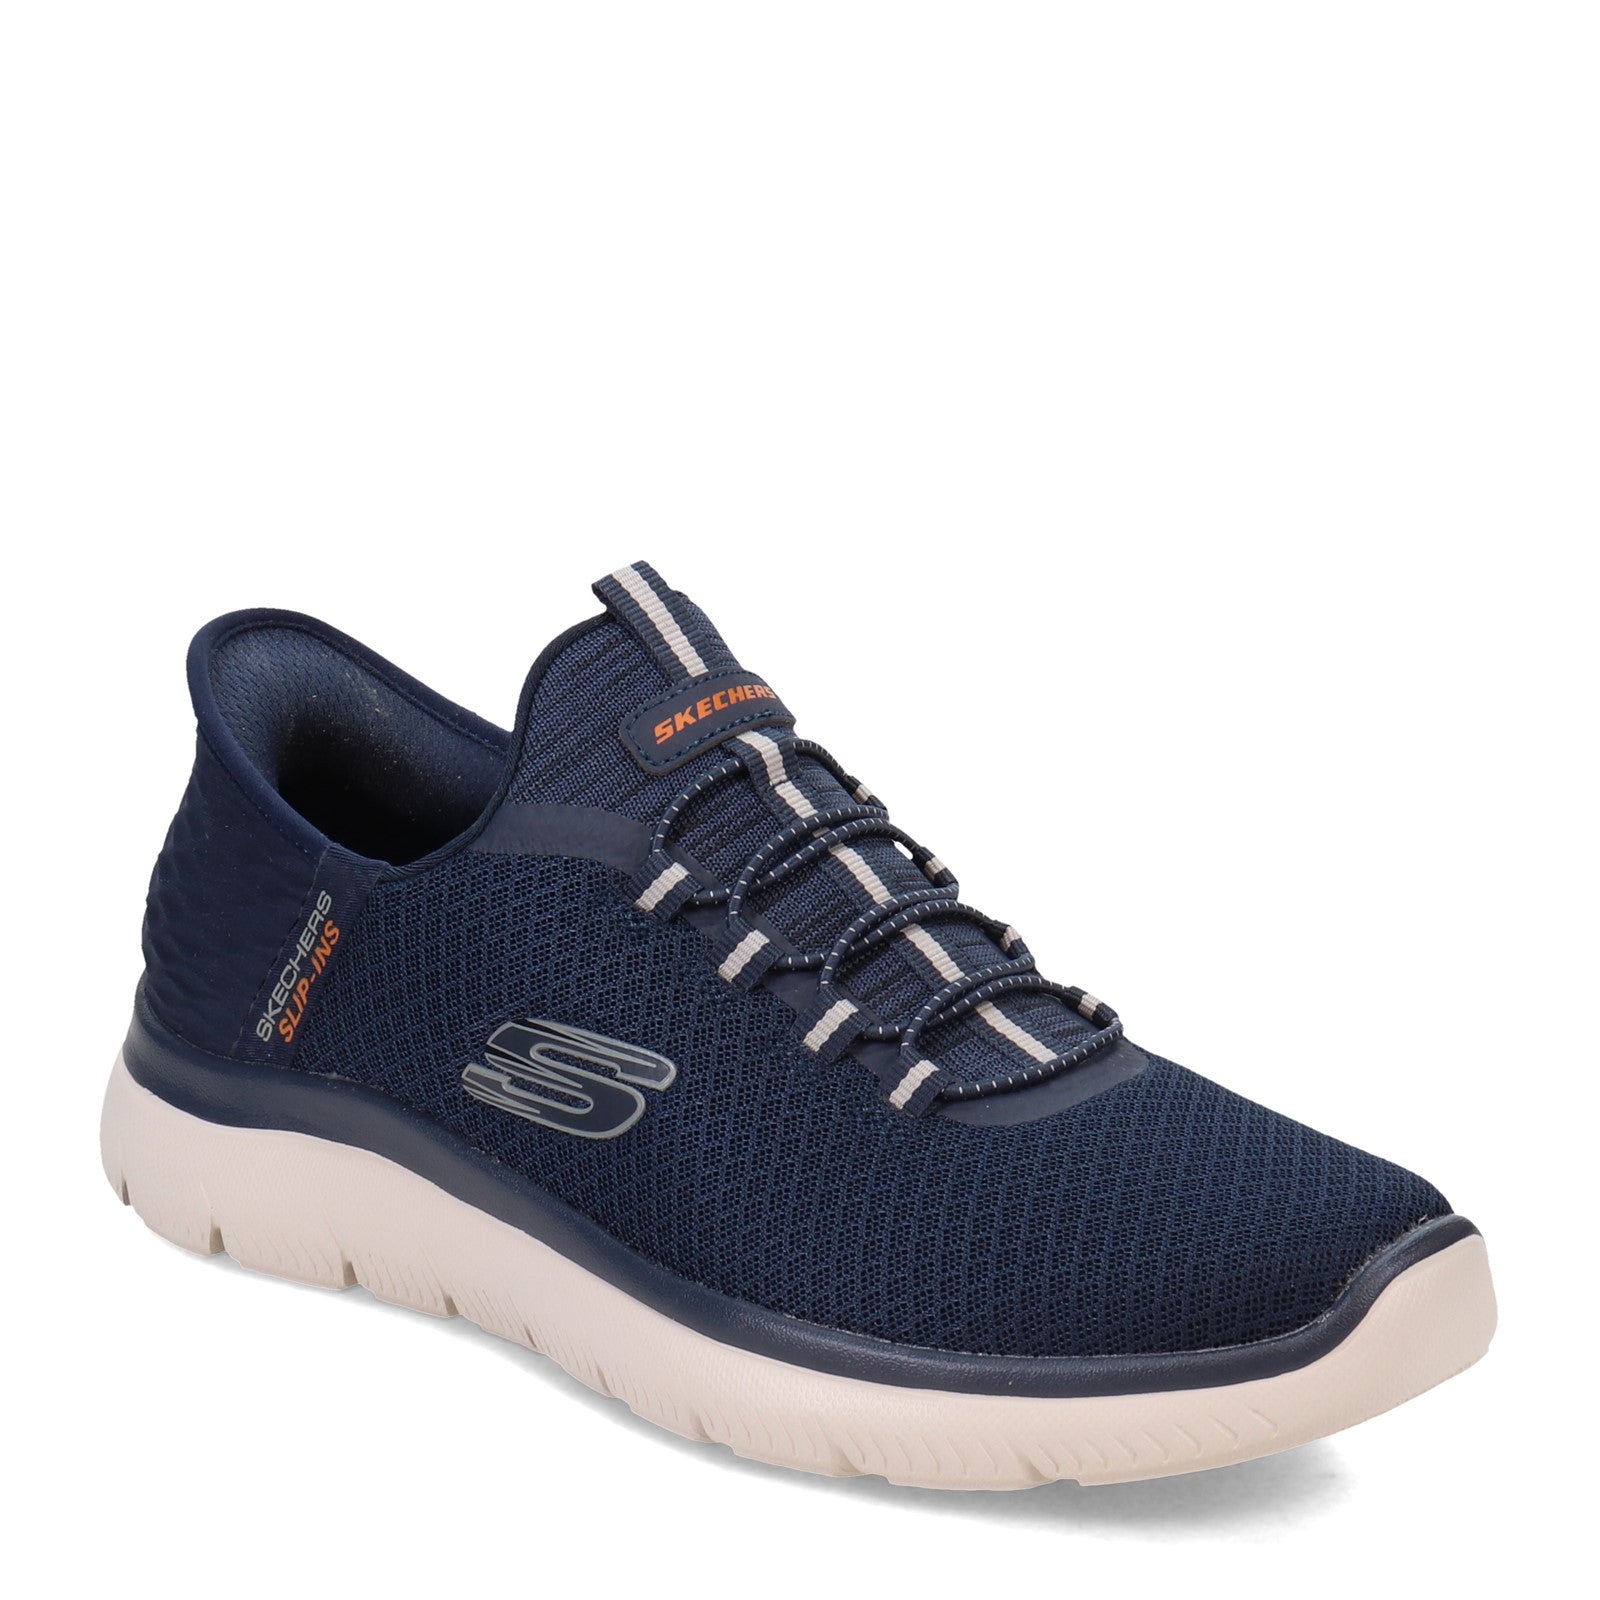 Buy mark Range Synthetic Leather Casual Sneakers for Men Blue at Amazon.in